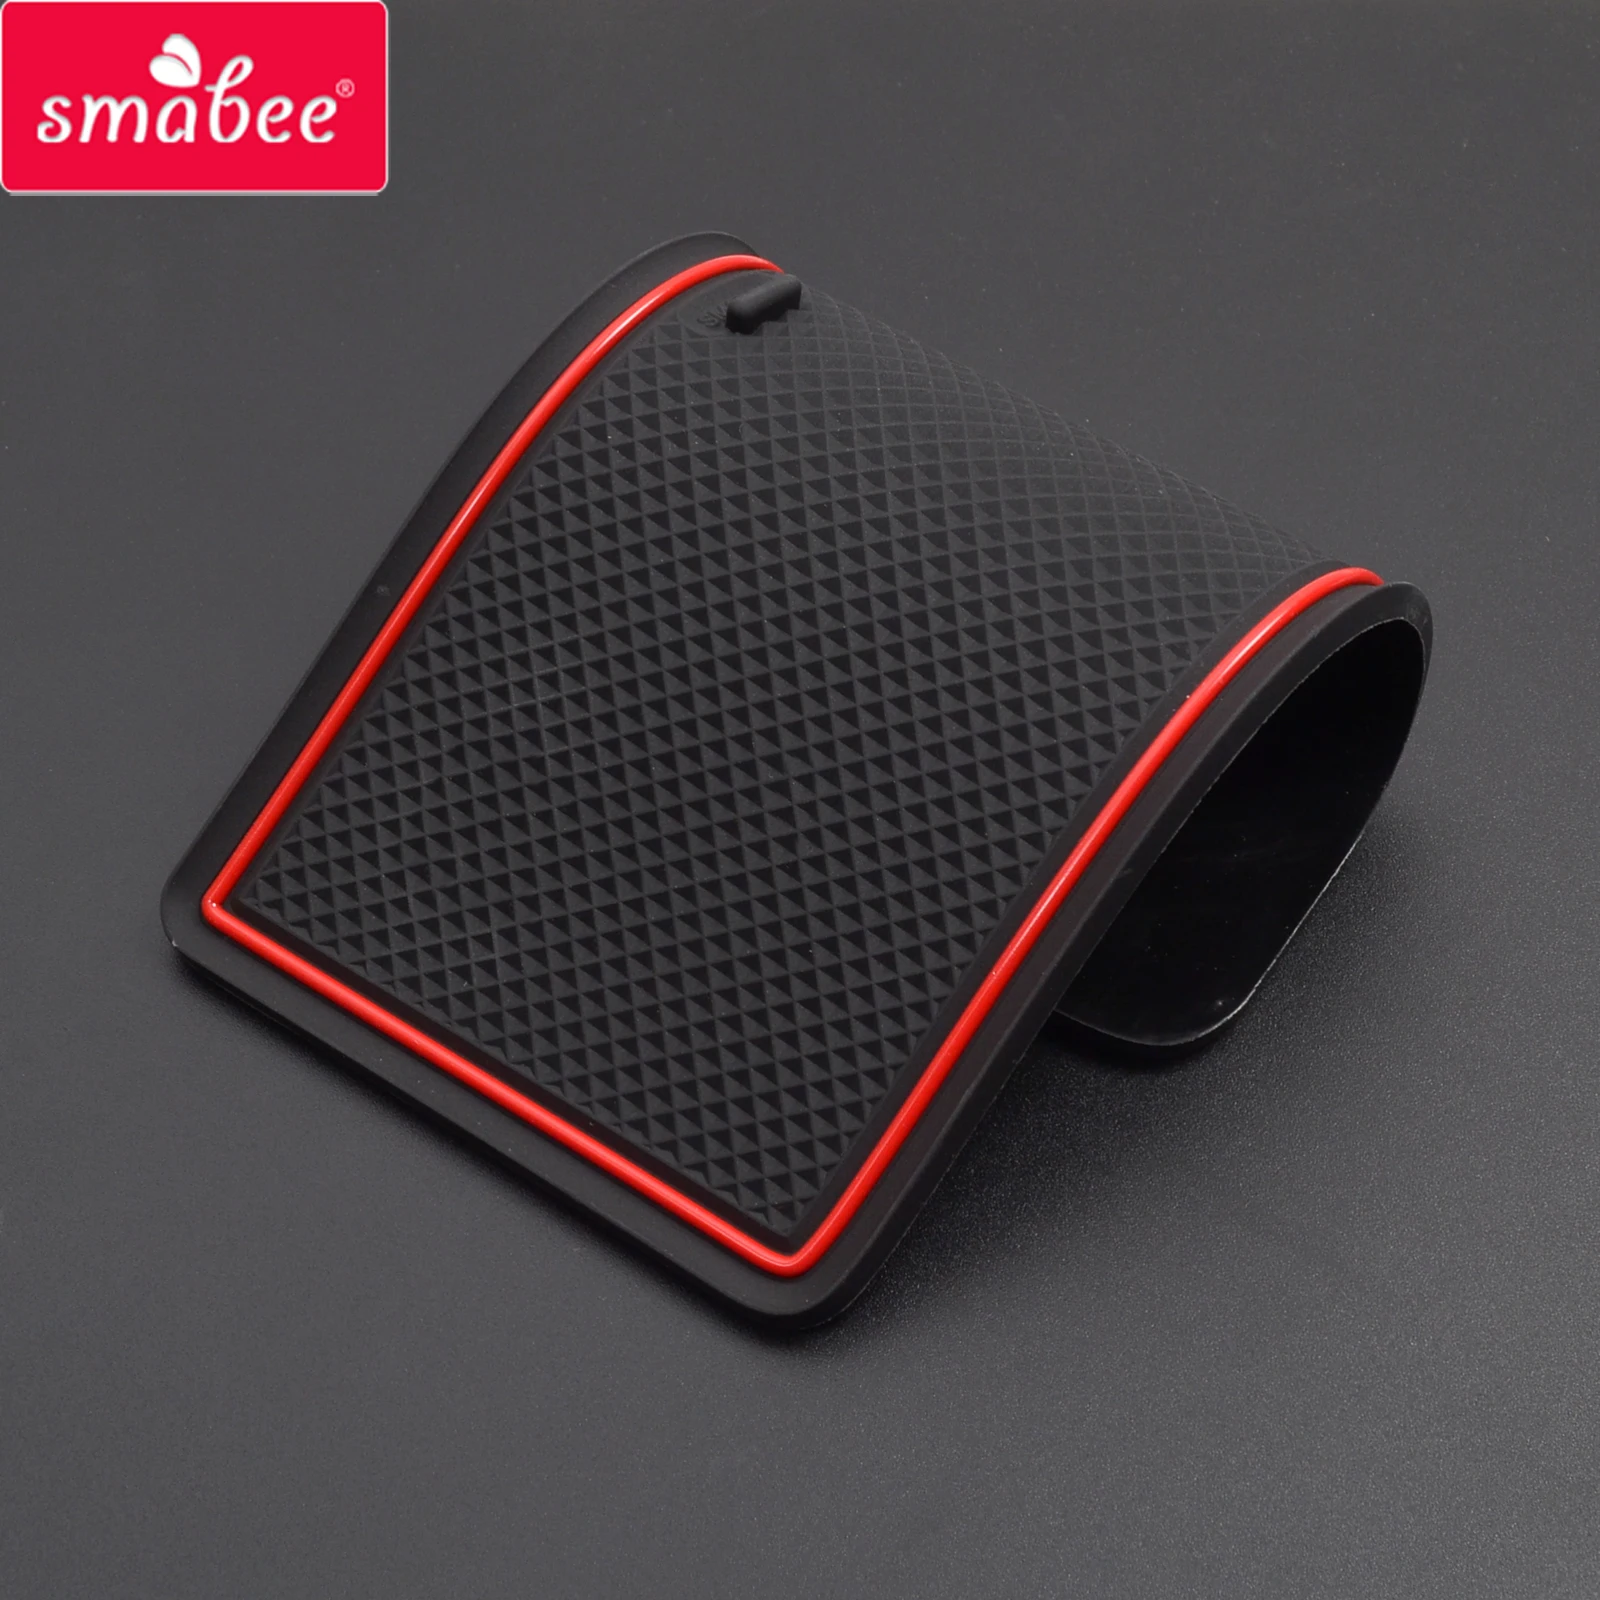 Smabee Anti-Slip Gate Slot Cup Mat Fit for Toyota Yaris Cross 2020 2021 SUV Accessories Rubber Door Pad Car Non-Slip Mats Cover BLACK